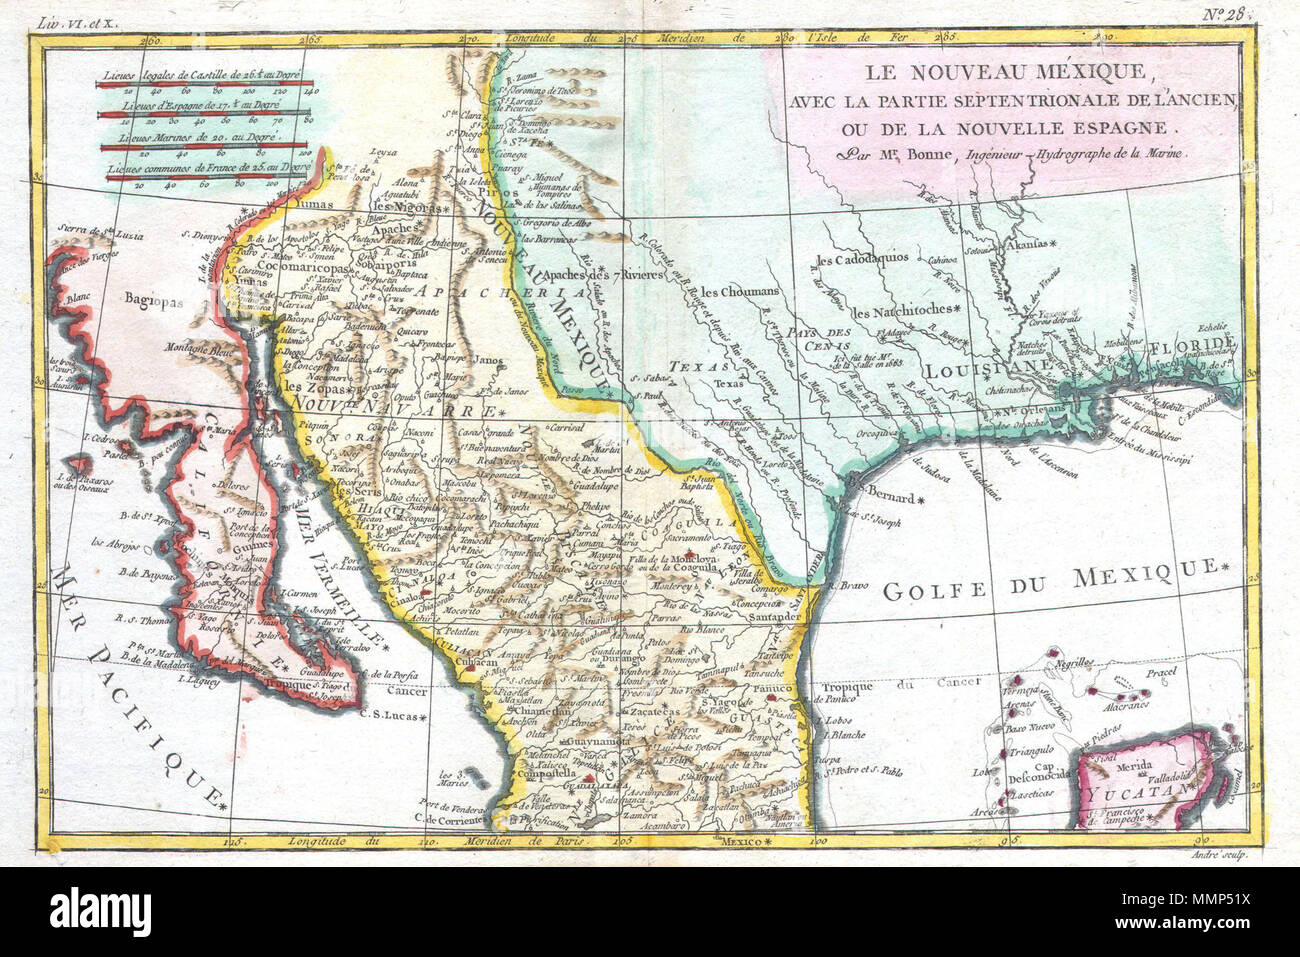 English: This is a beautiful c. 1780 Bonne map of the northern or Spanish colonial  Mexico. Covers from the Pacific Ocean through Mexico, Baja California, New  Mexico, Texas, and Louisiana —